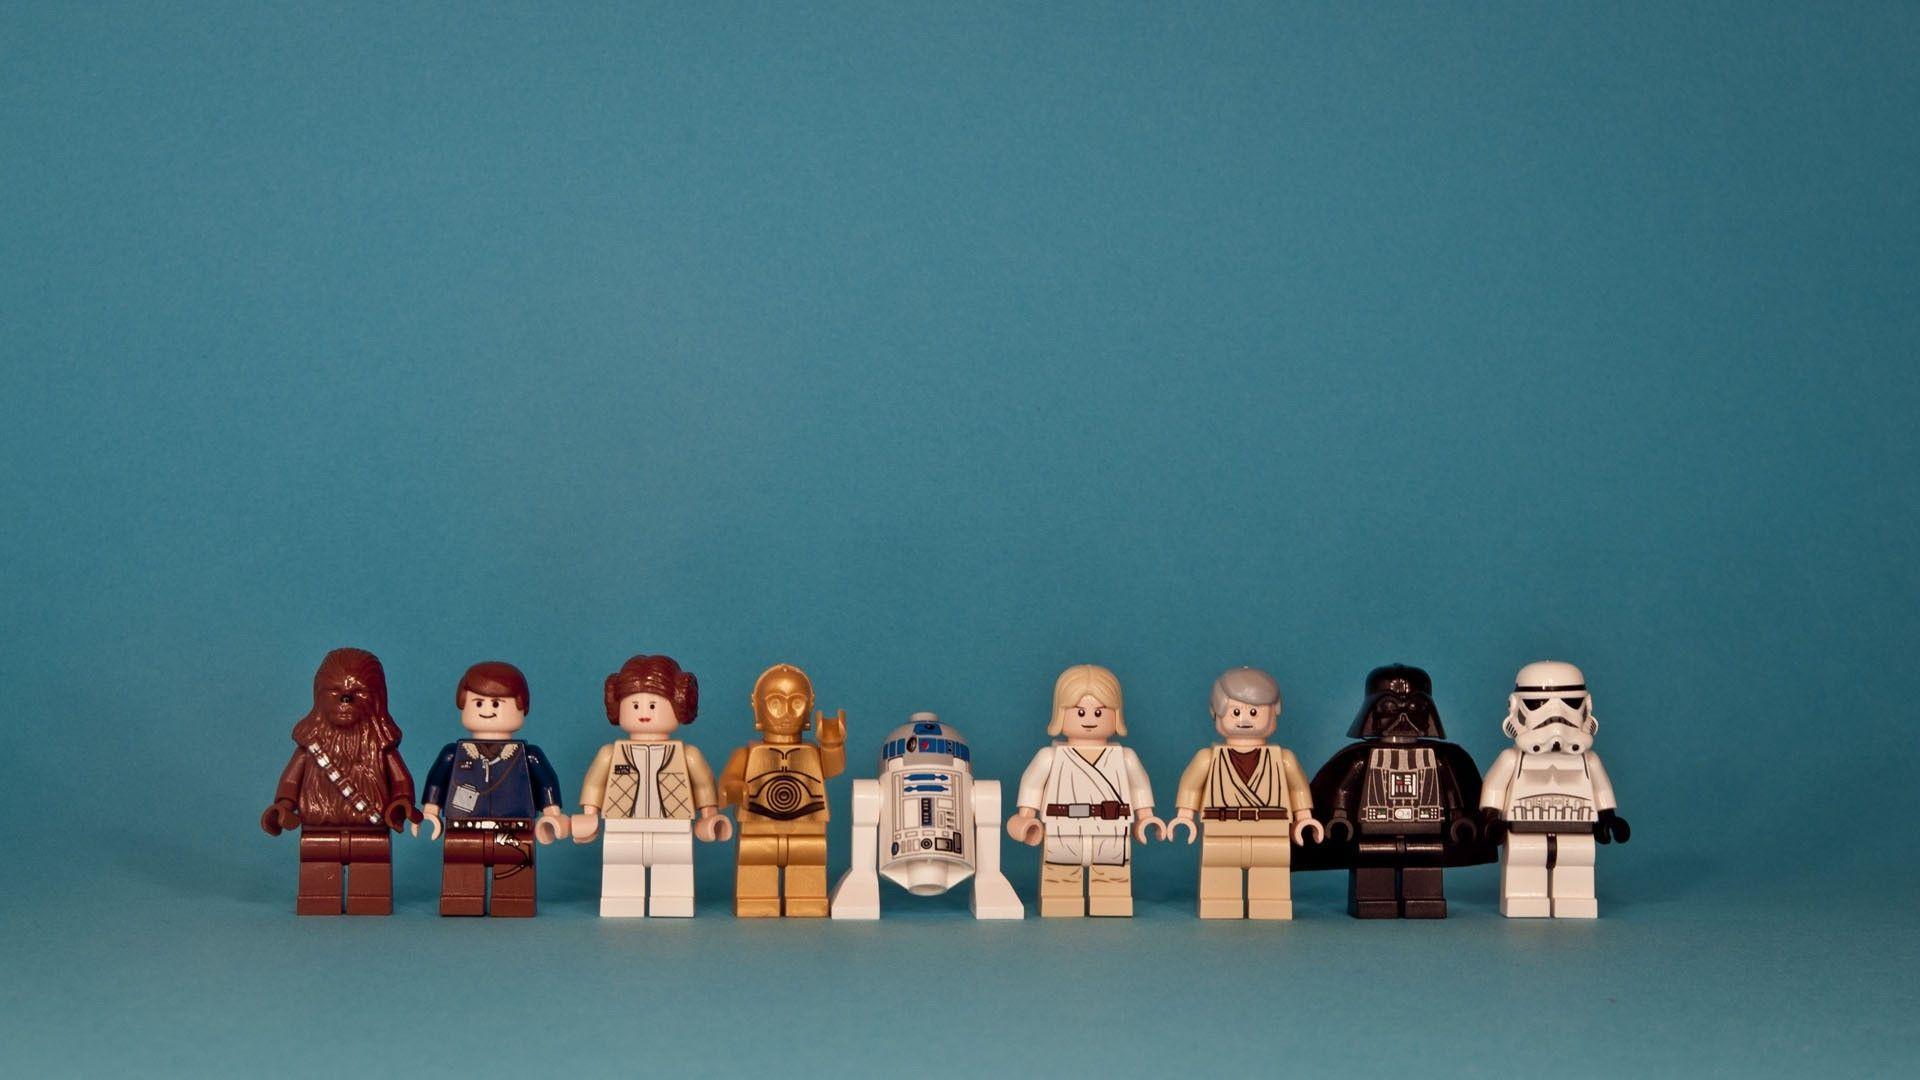 Cool Lego Background For Zoom, Team, Cute, City, Star War Wallpaper In High Resolution